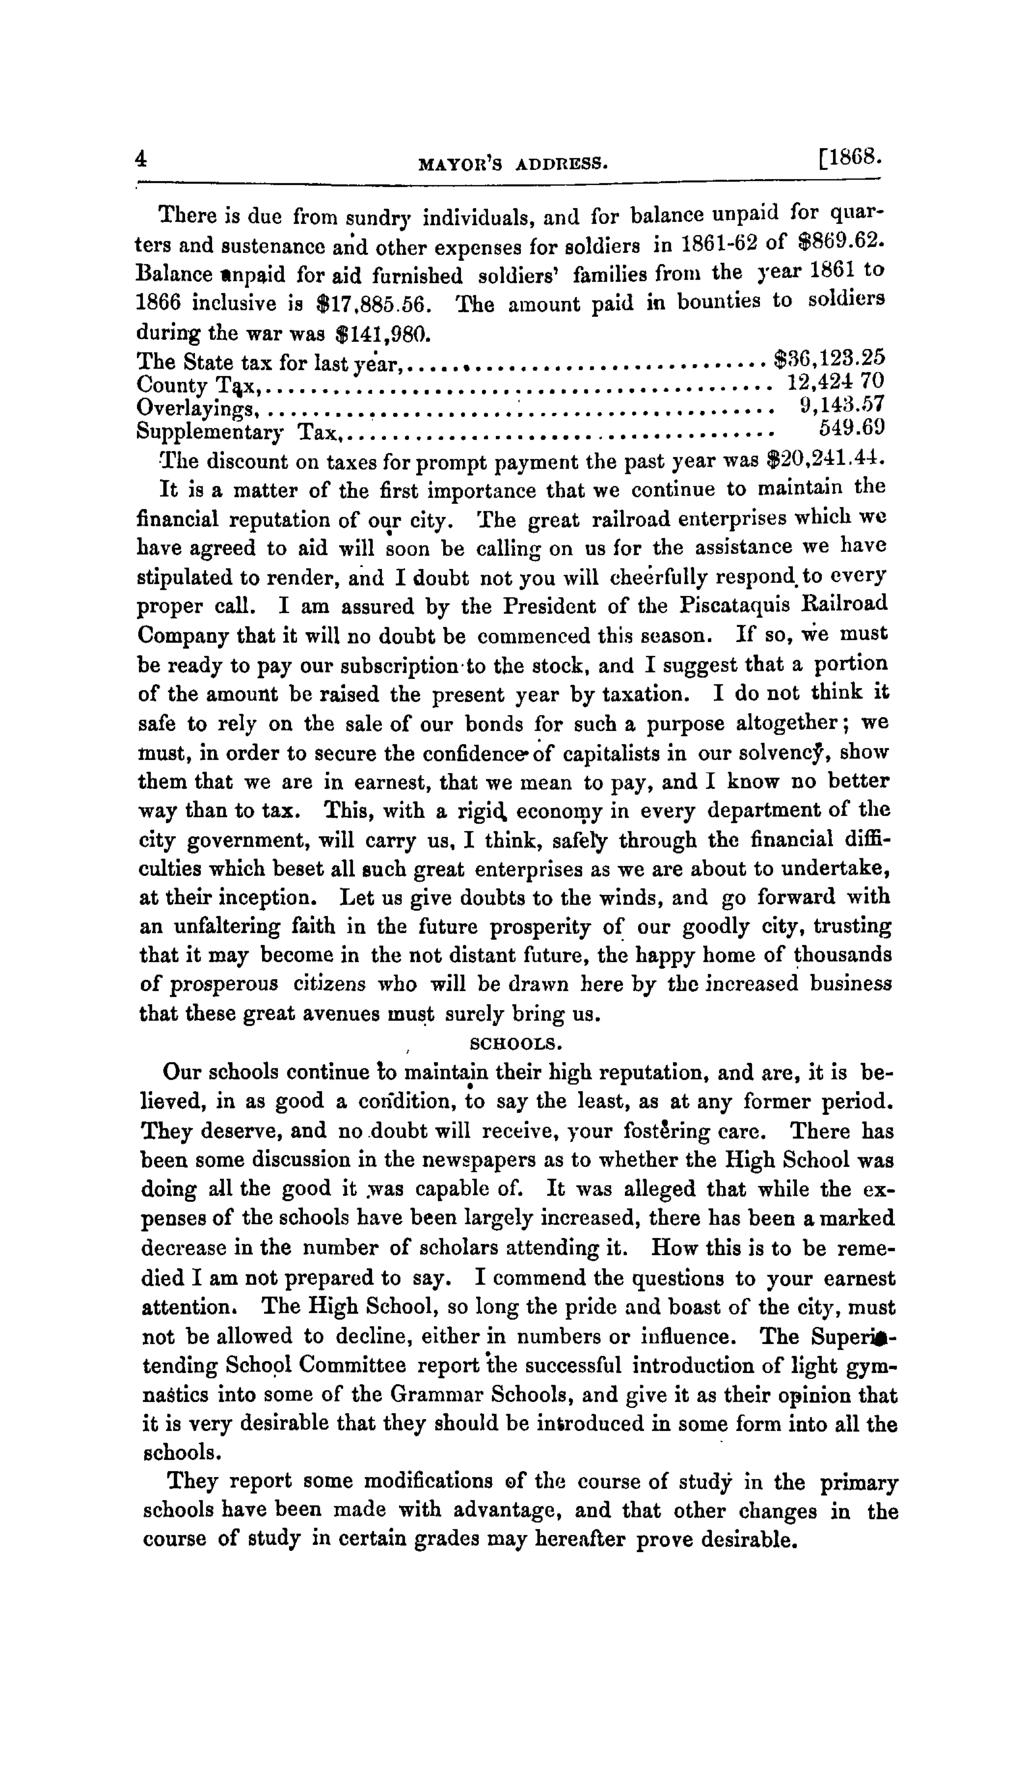 4 MAYOR'S ADDRESS. [1868. There is due from sundry individuals, and for balance unpaid for quarters and sustenance arid other expenses for soldiers in 1861-62 